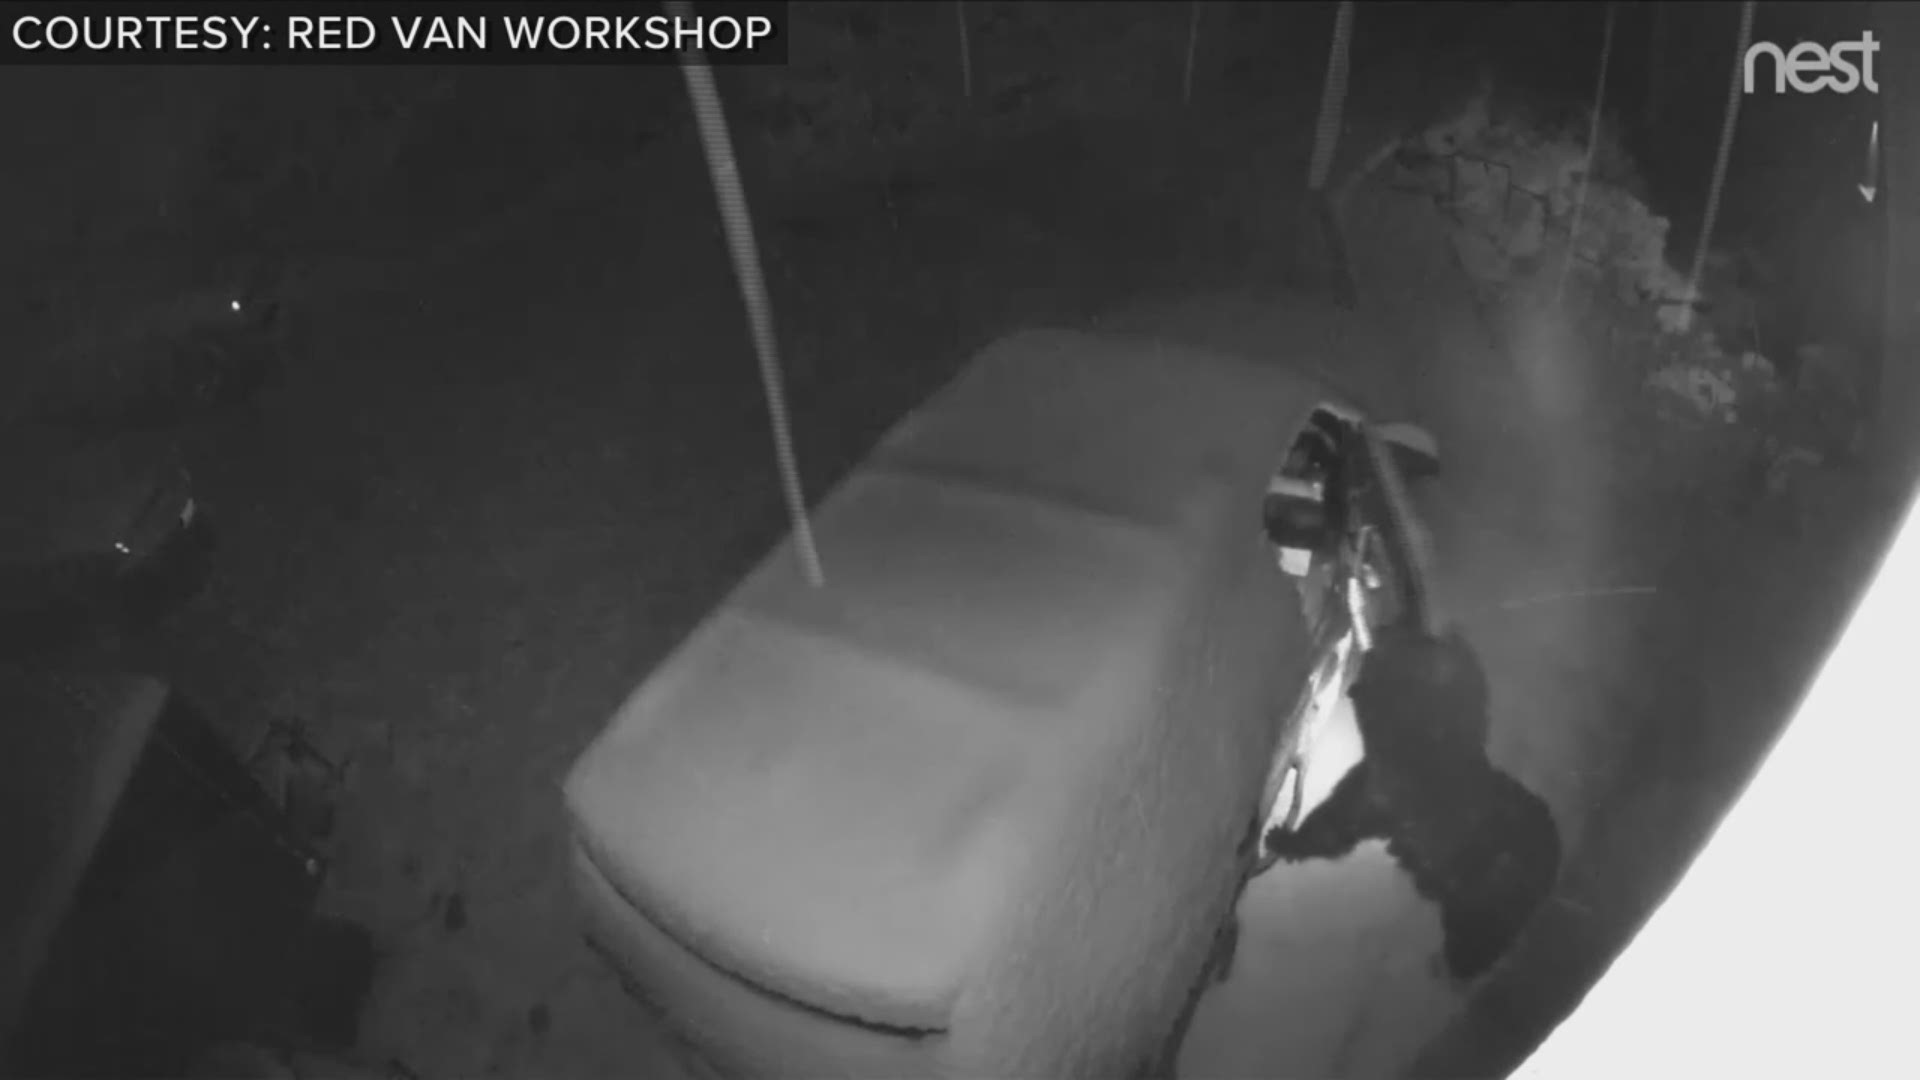 A Red Van Workshop employee recorded this video in West Boulder over the weekend. It shows the bear gently opening three doors, likely looking for food.